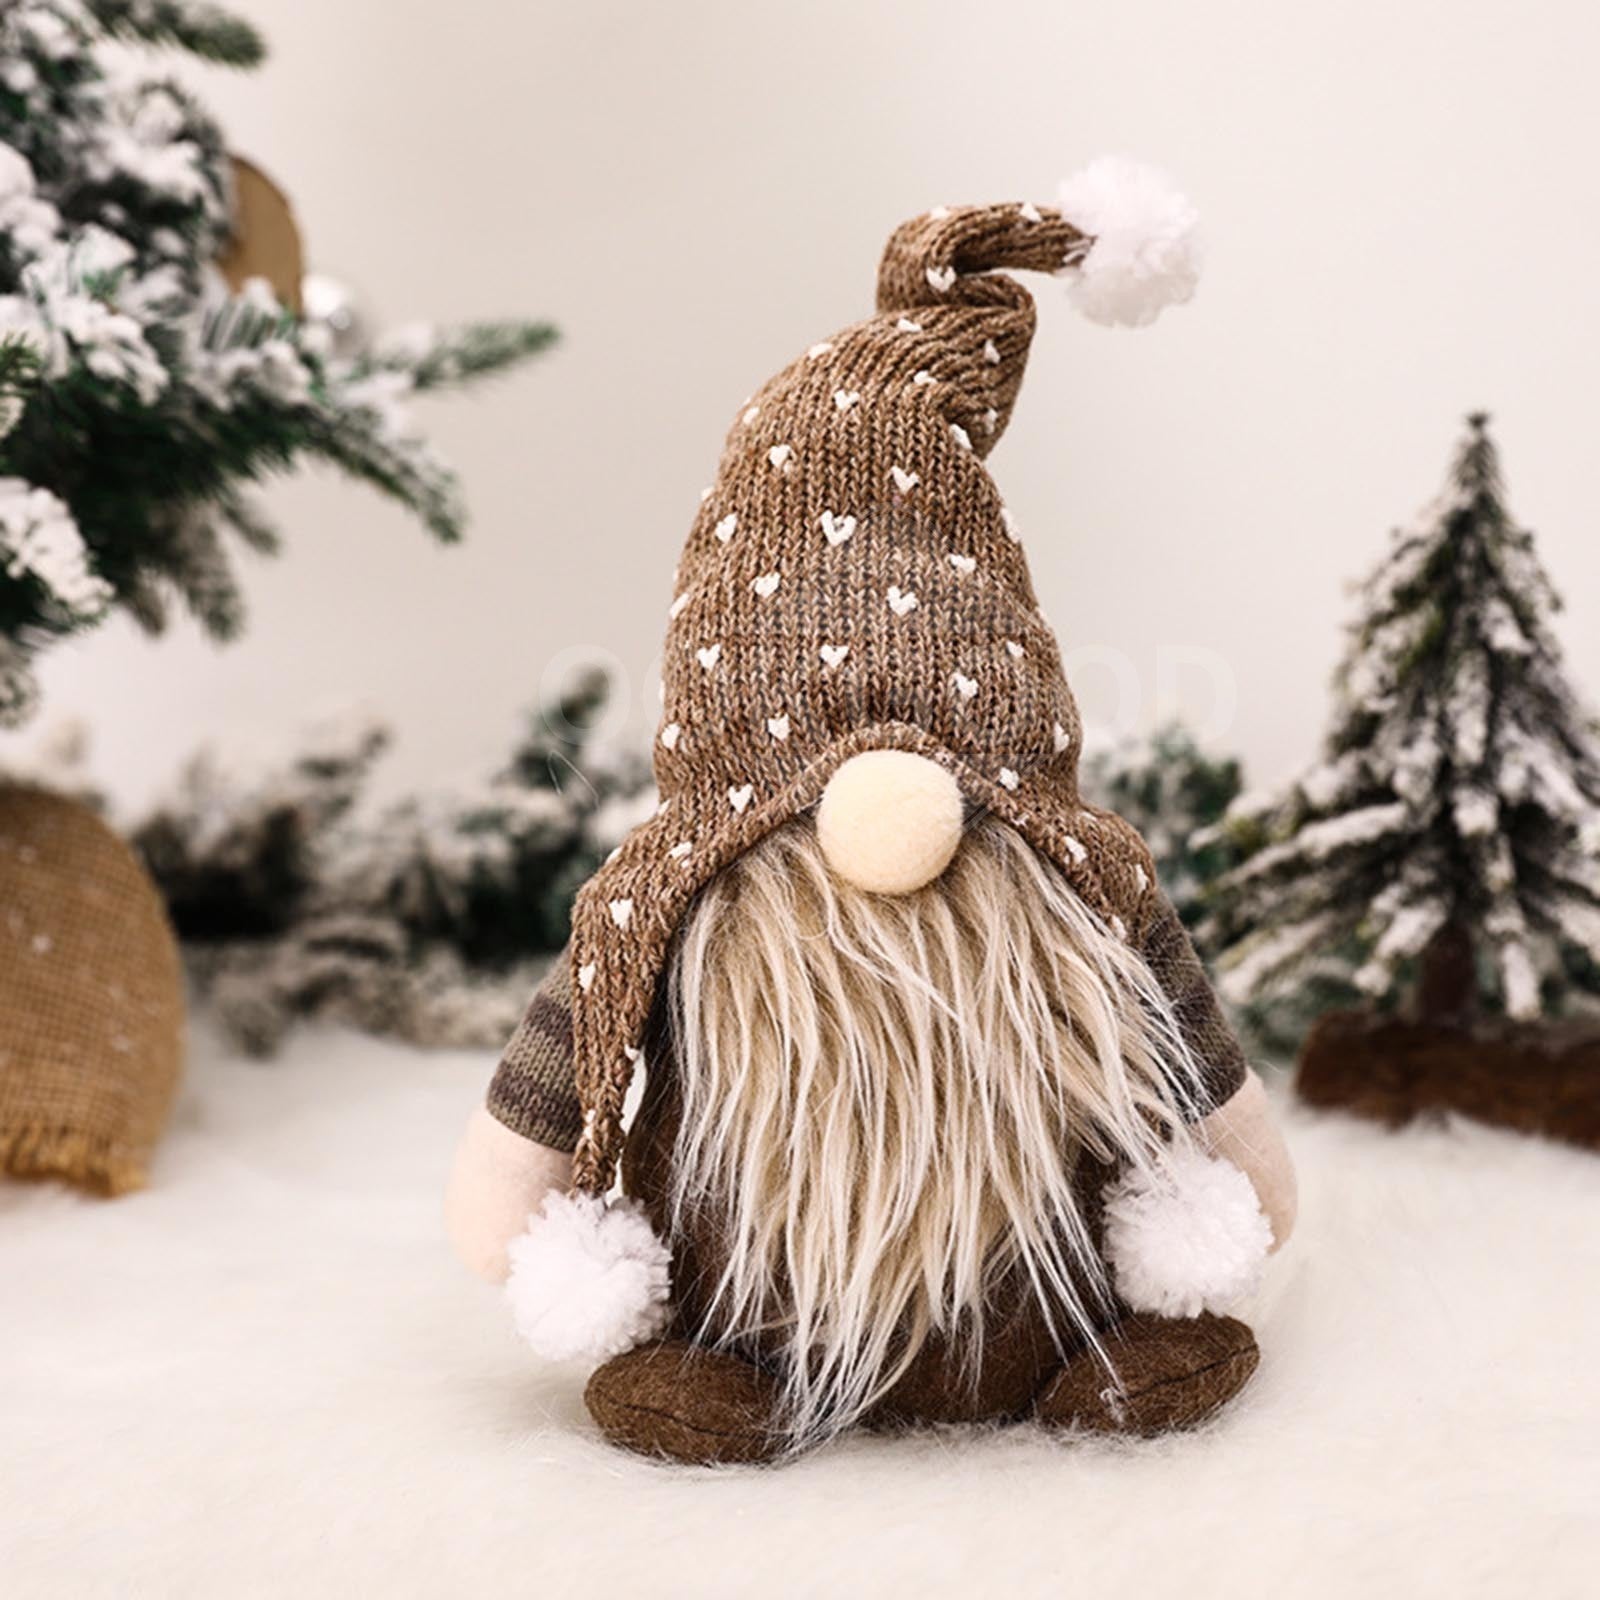 Handmade Plush Gnome With Knitted Hat For Holiday Gift